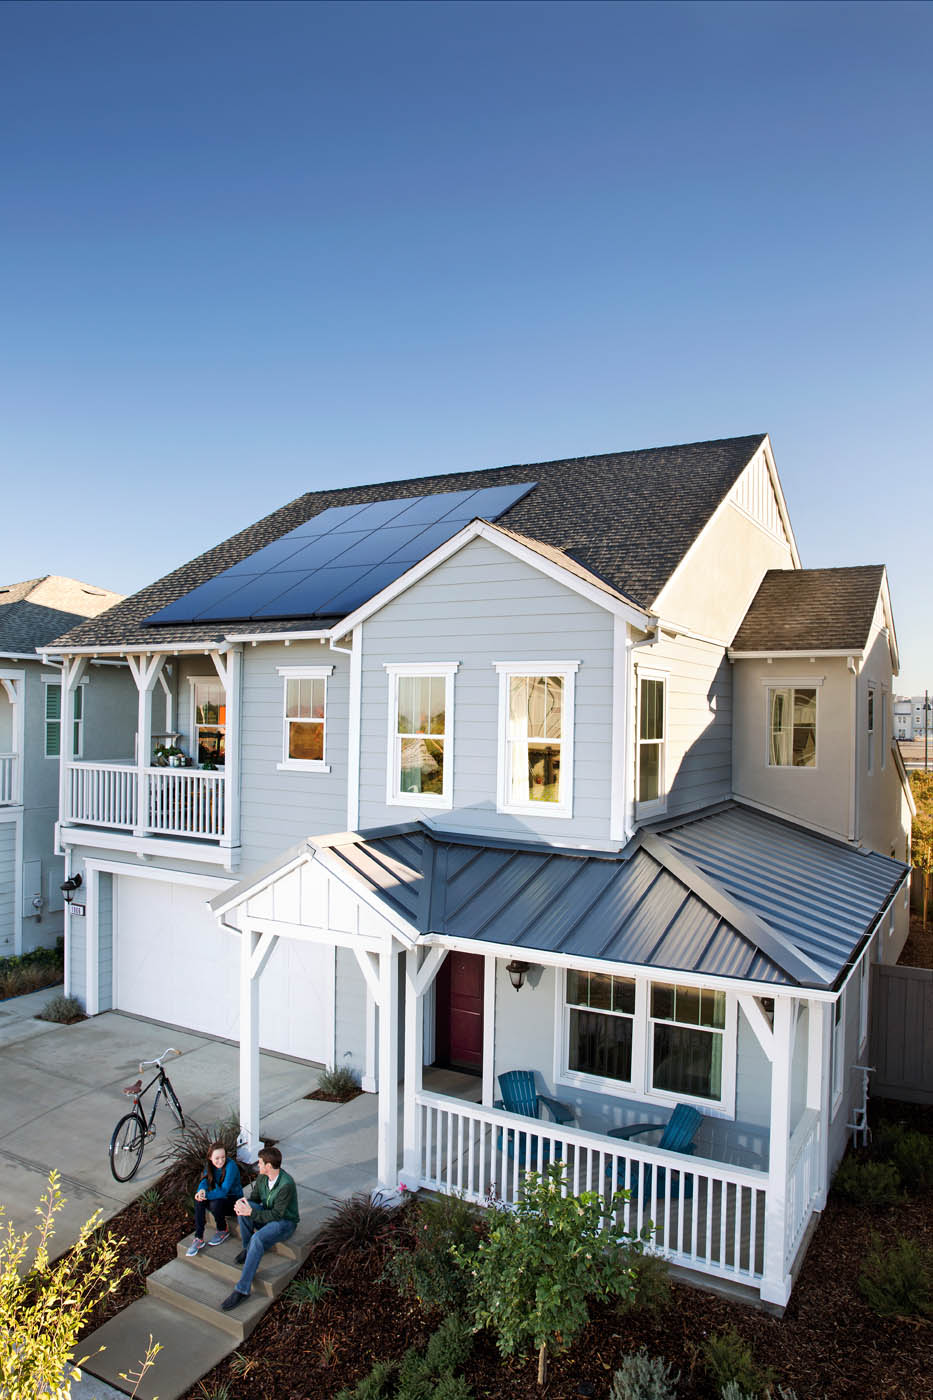 Solar Energy Partners is the best residential solar company in SC & GA - boost your homes value.